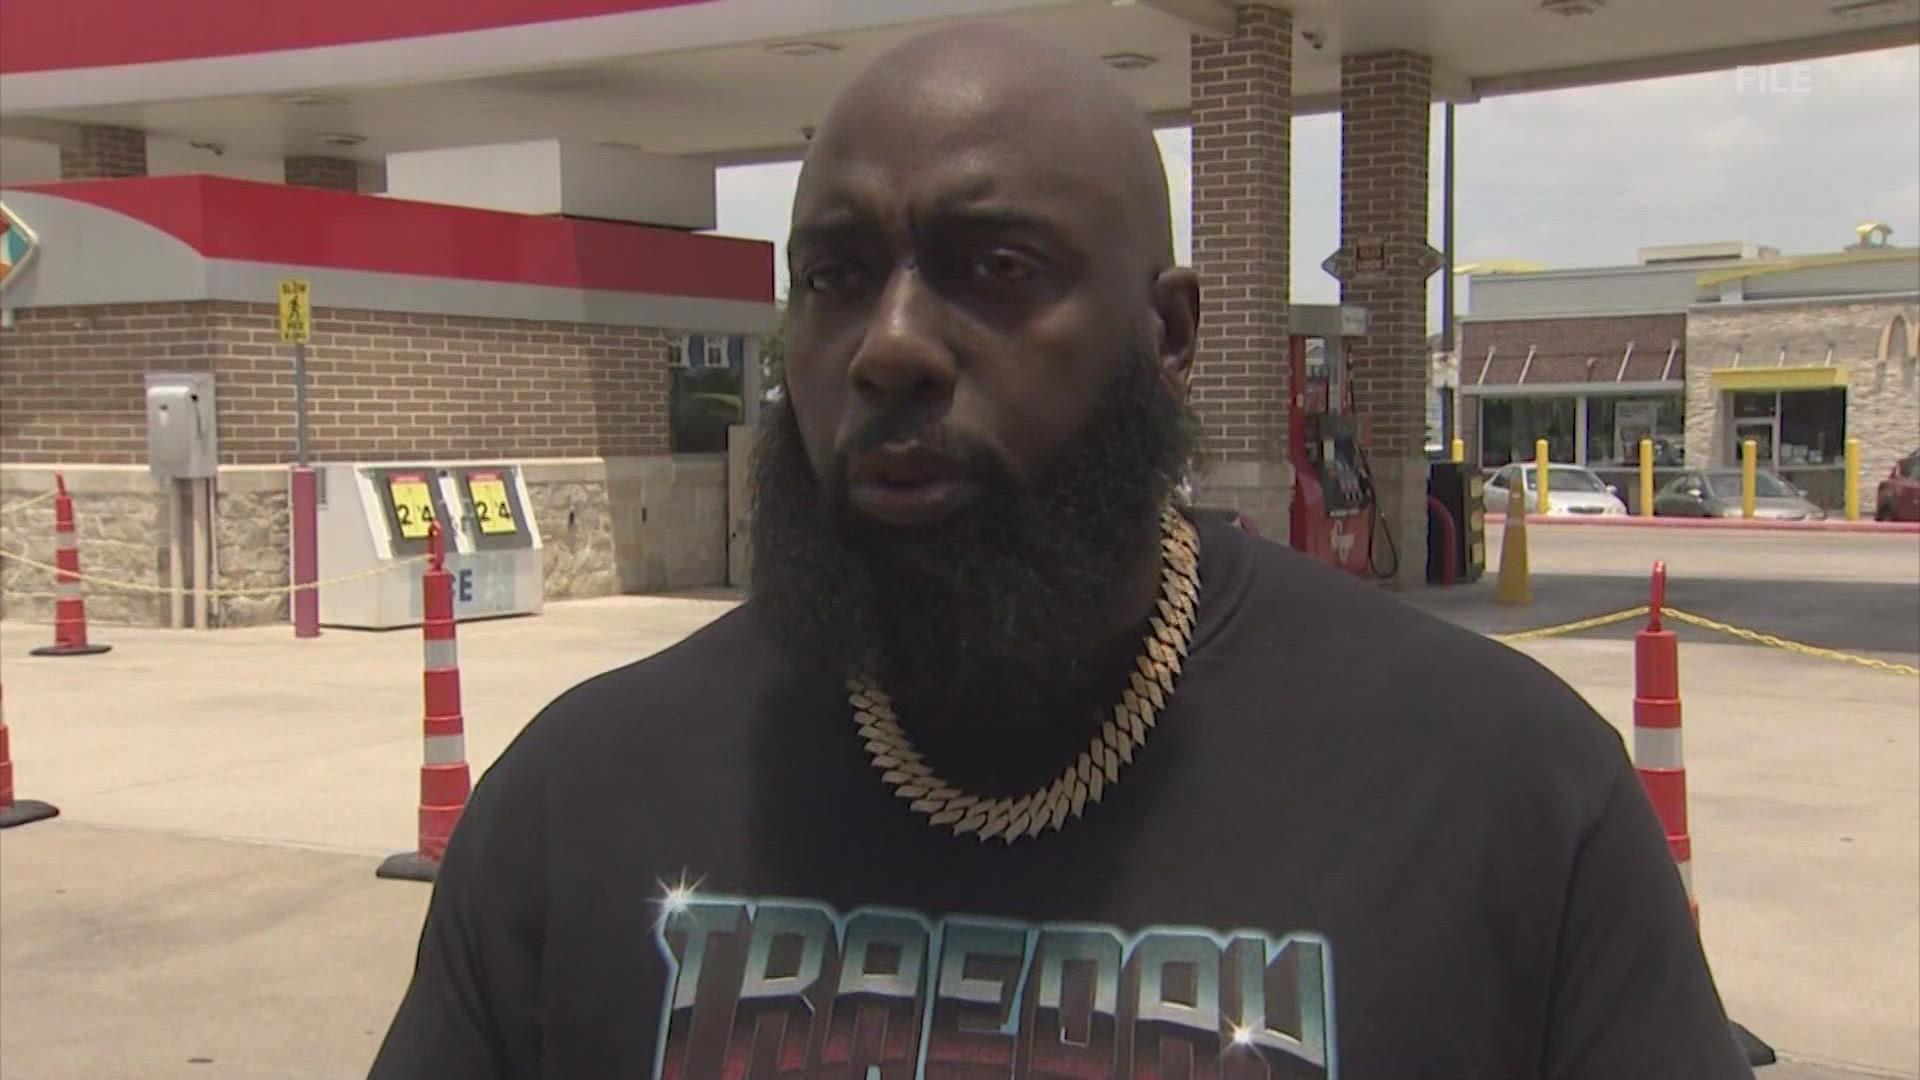 According to court documents, Z-Ro alleges Trae Tha Truth sucker punched him during a fight outside of a restaurant in east downtown Houston.